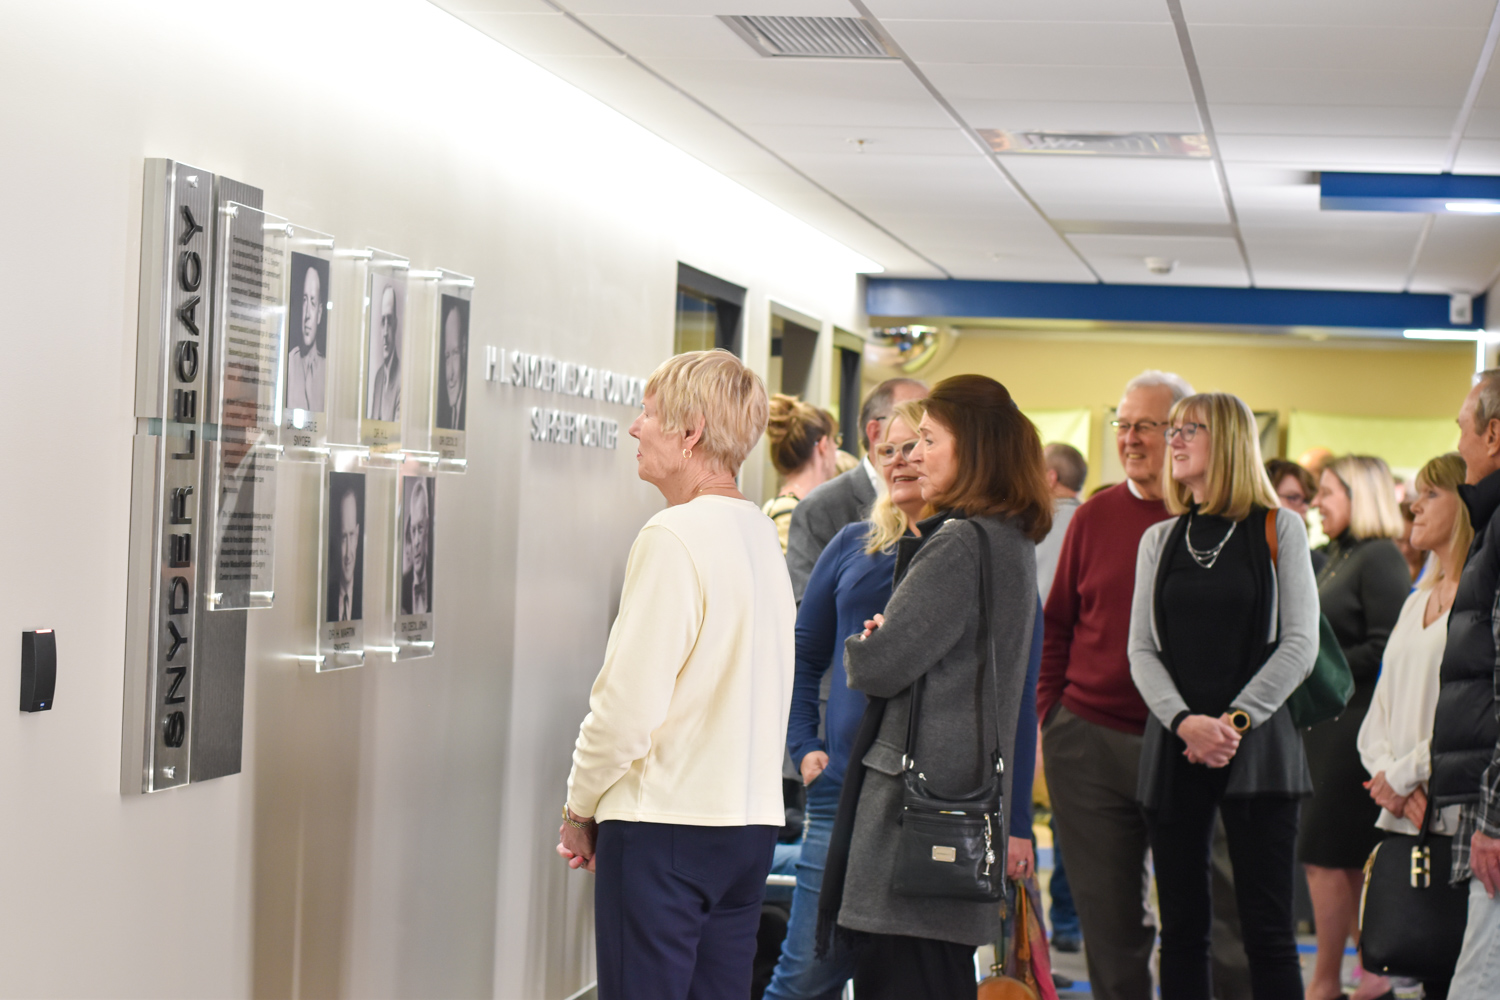 William Newton Hospital guests view the Snyder Legacy wall at the H. L. Snyder Medical Foundation Surgery Center.